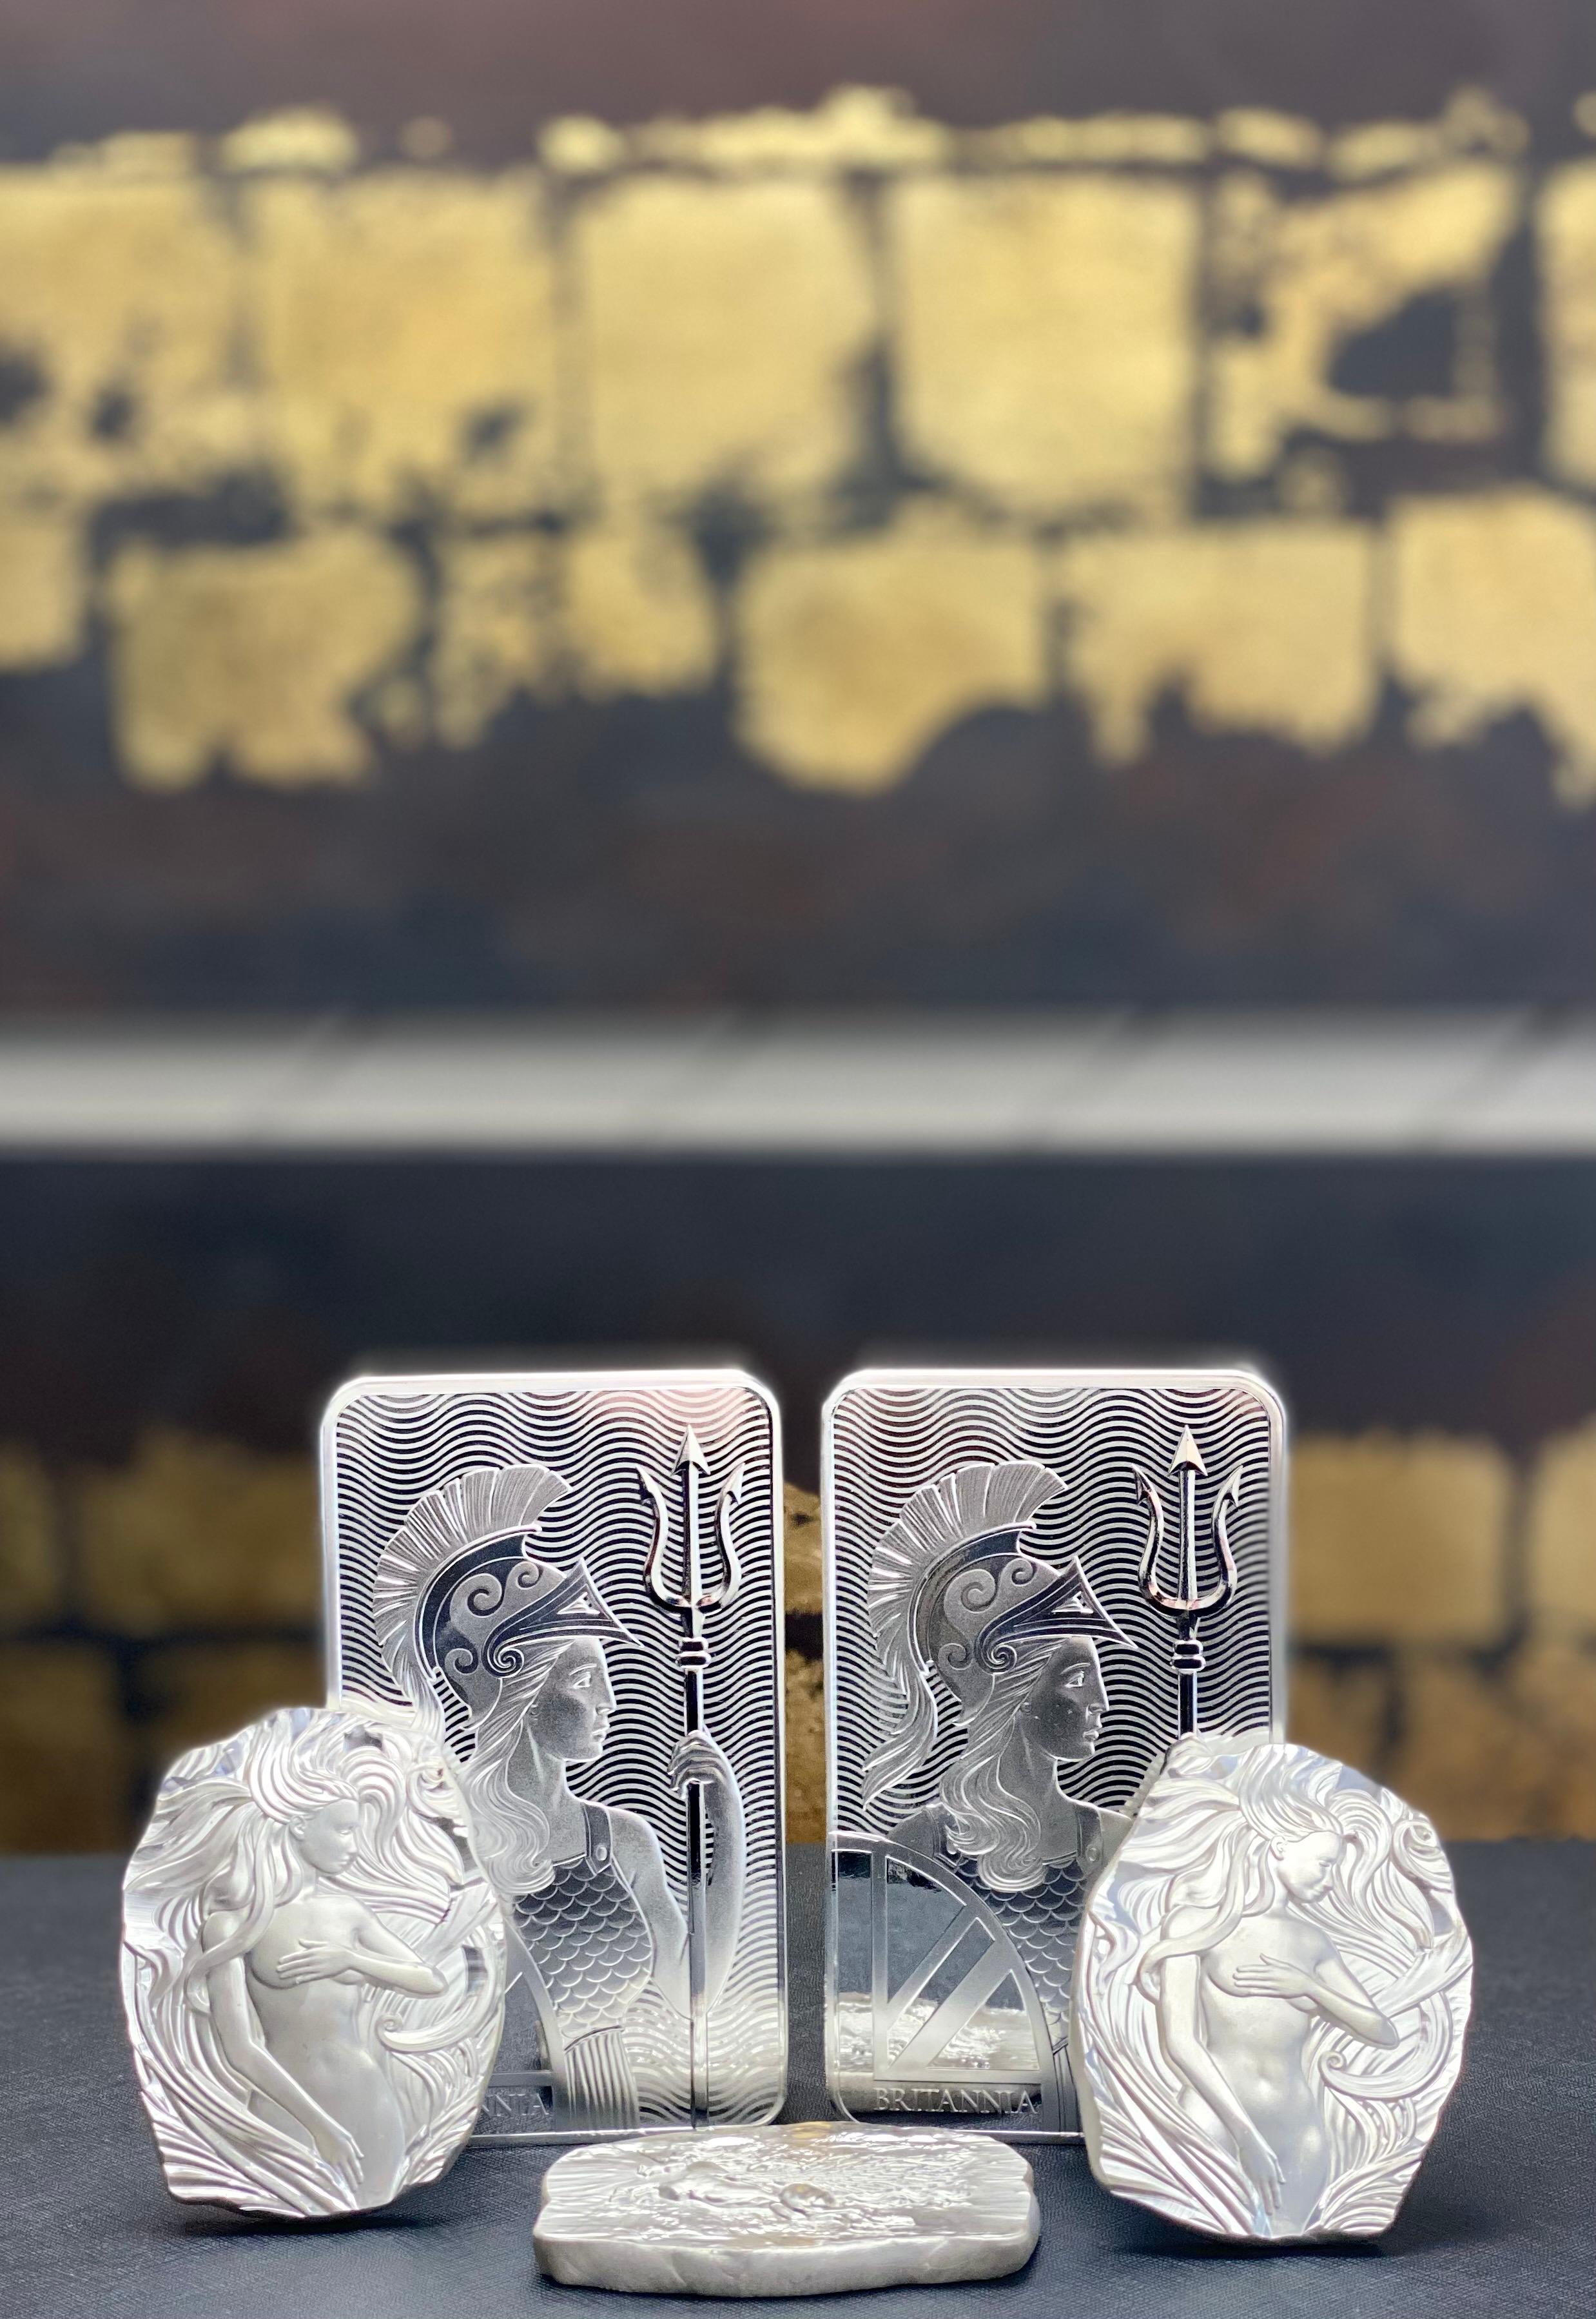 100 oz Silver Royal Mint Bars and Argentia 10 oz Silver